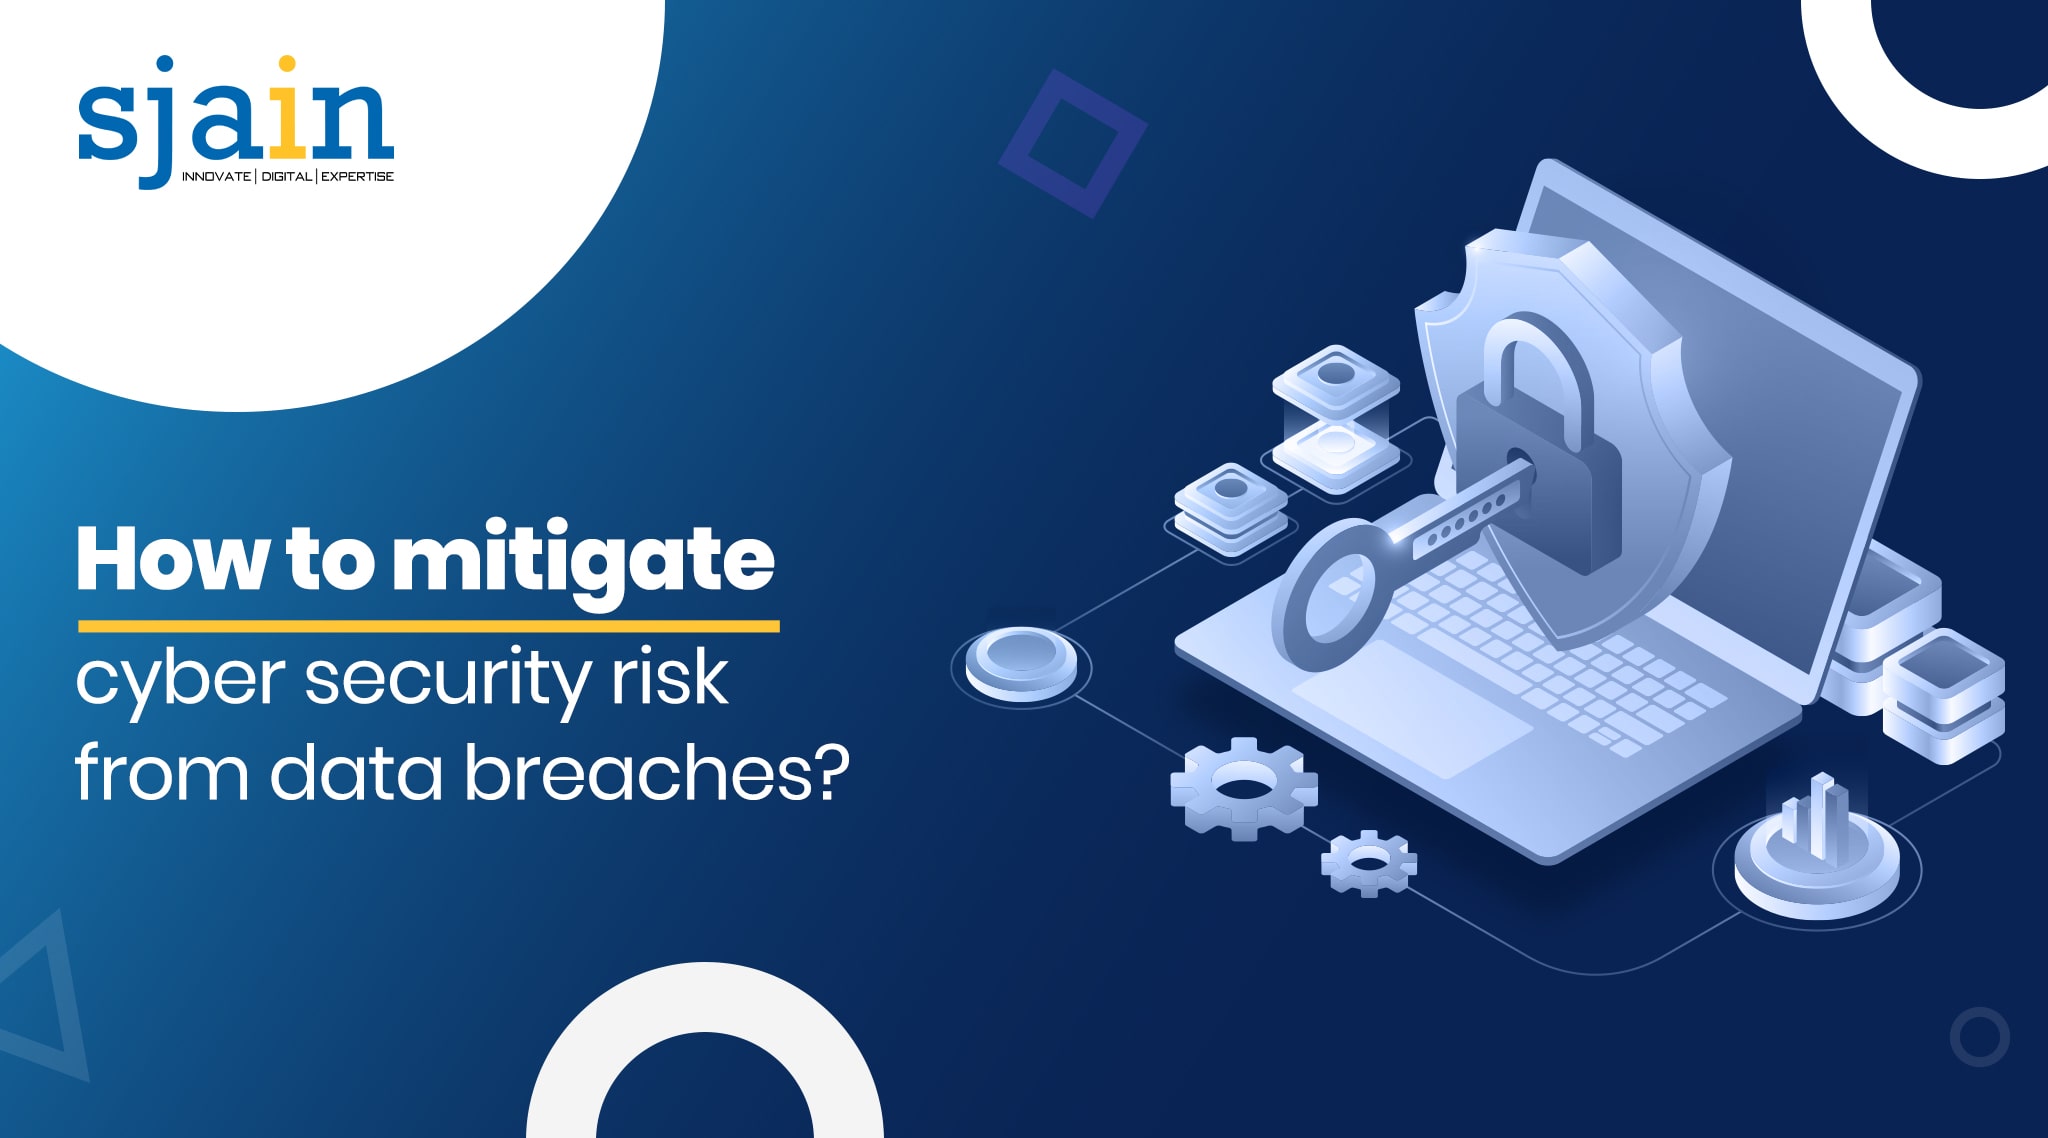 How to Mitigate Cyber Security Risk from data breaches?